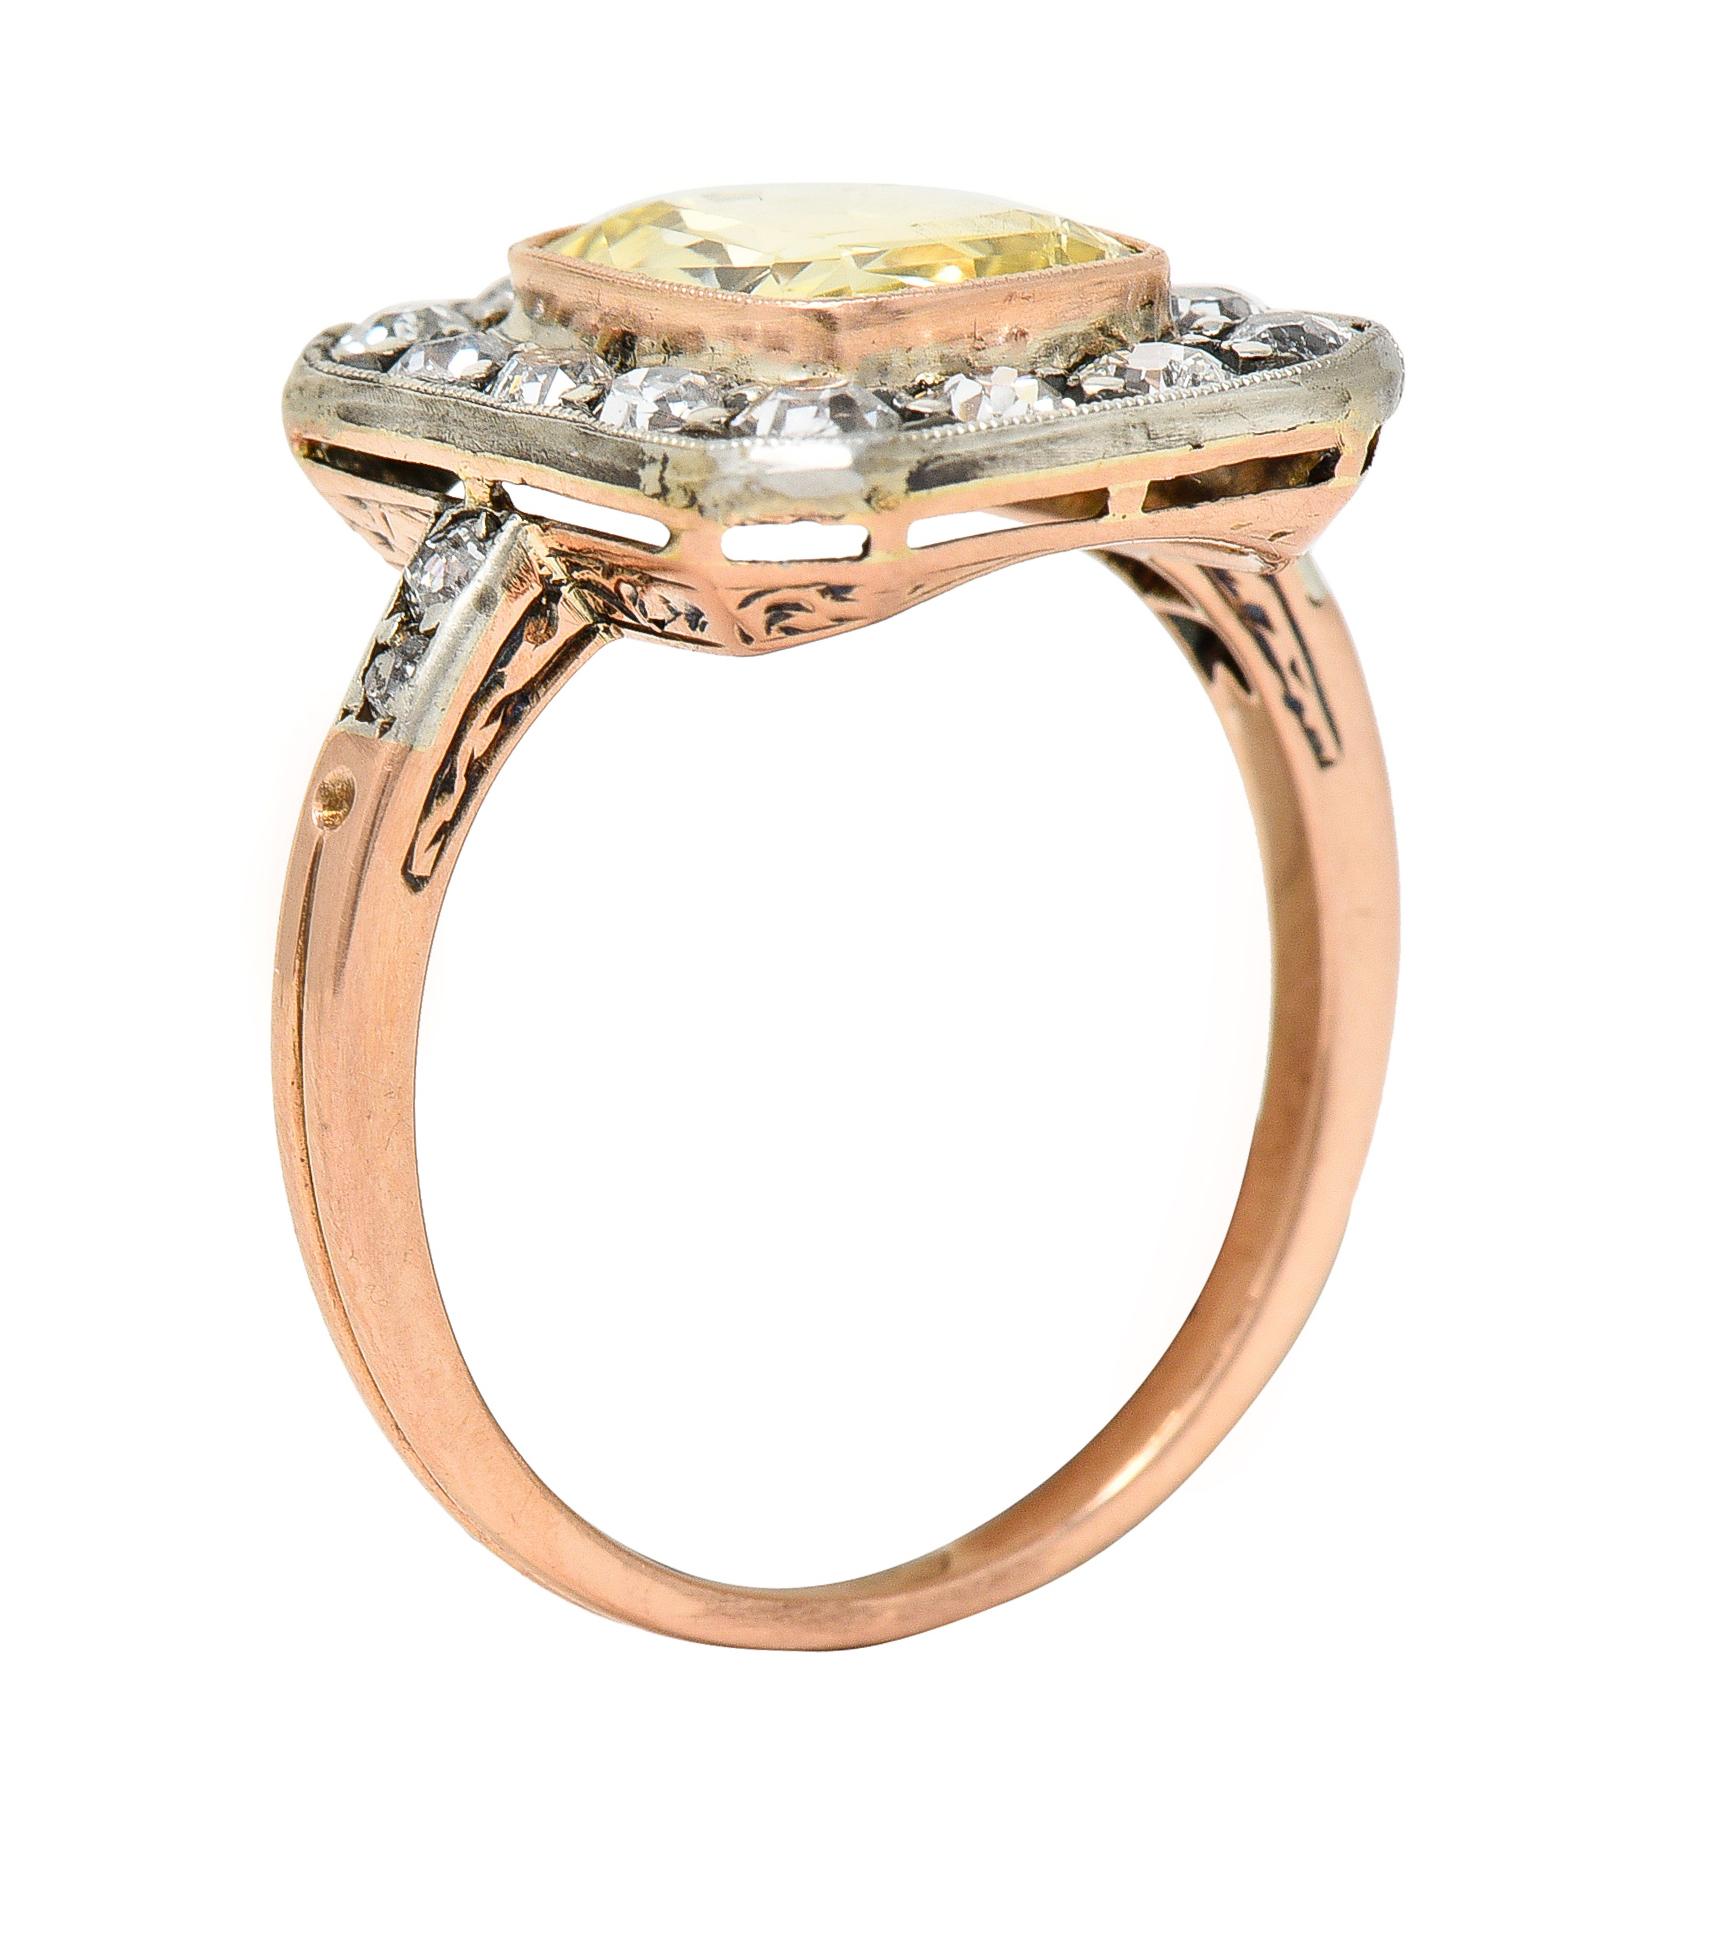 Centering a cushion cut sapphire weighing 2.95 carats - transparent light yellow in color
Natural with no indications of heat treatment - bezel set in rose gold 
With a platinum-topped halo surround of bead set old European cut diamonds 
With